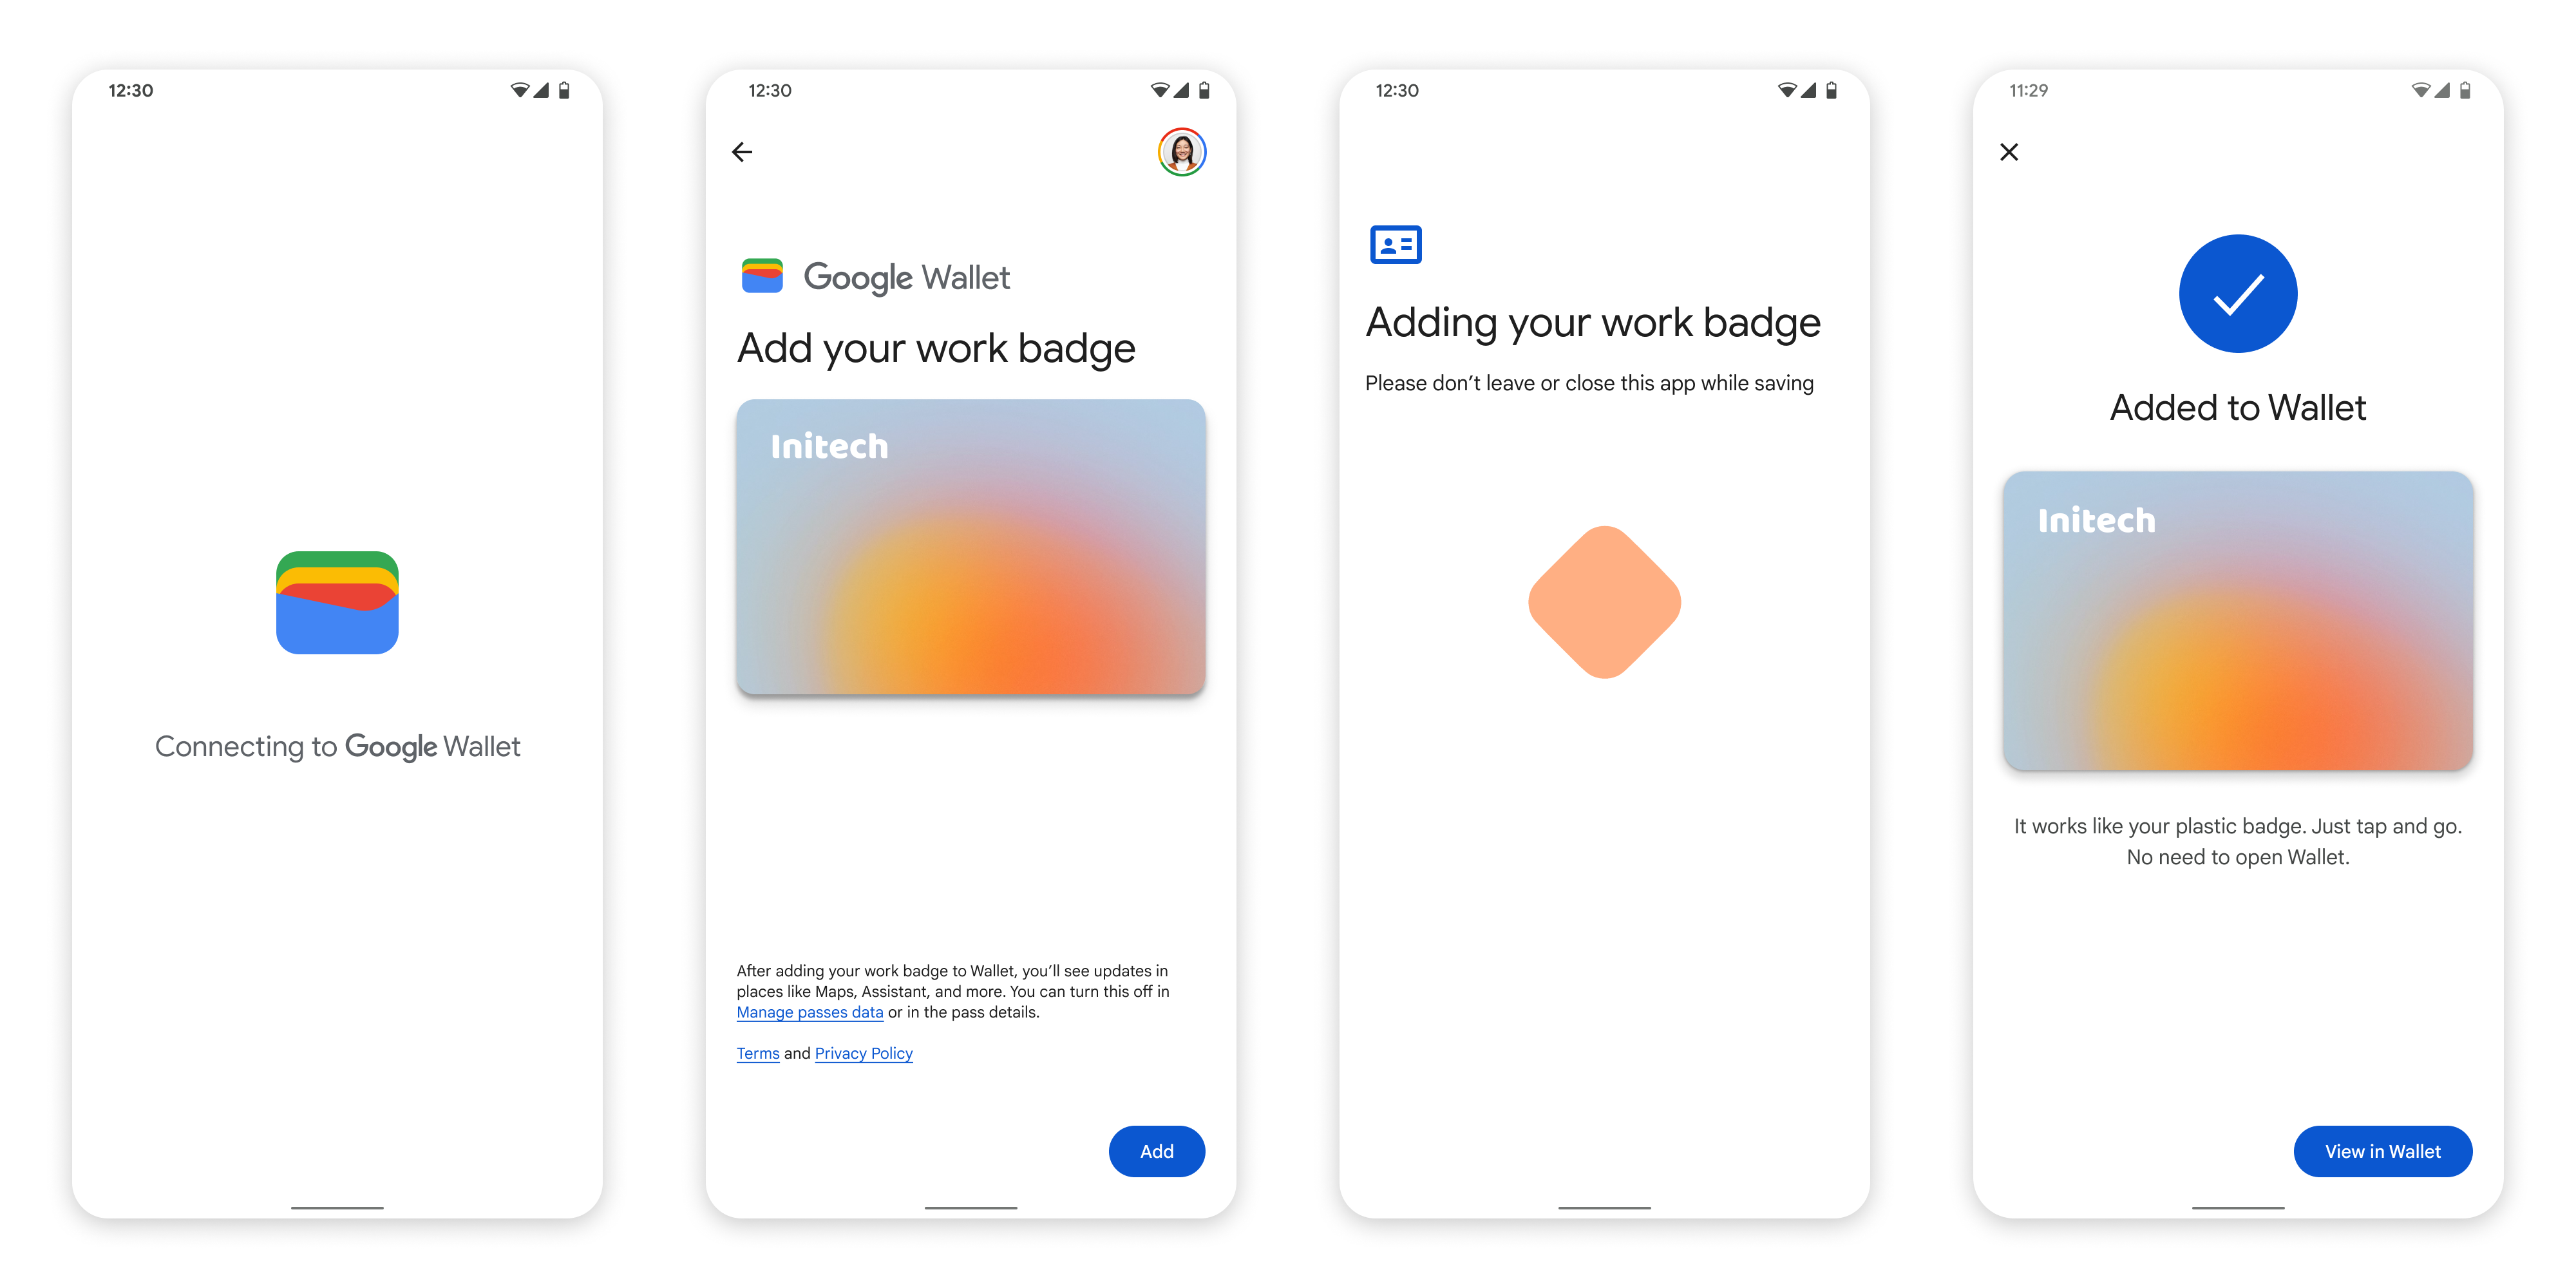 In the first screen, the user is shown a loading screen within
      Google Wallet. In the second screen, the user is shown terms
      and conditions. In the third screen, the user is shown another loading
      screen. In the fourth screen, the user is shown the success screen.